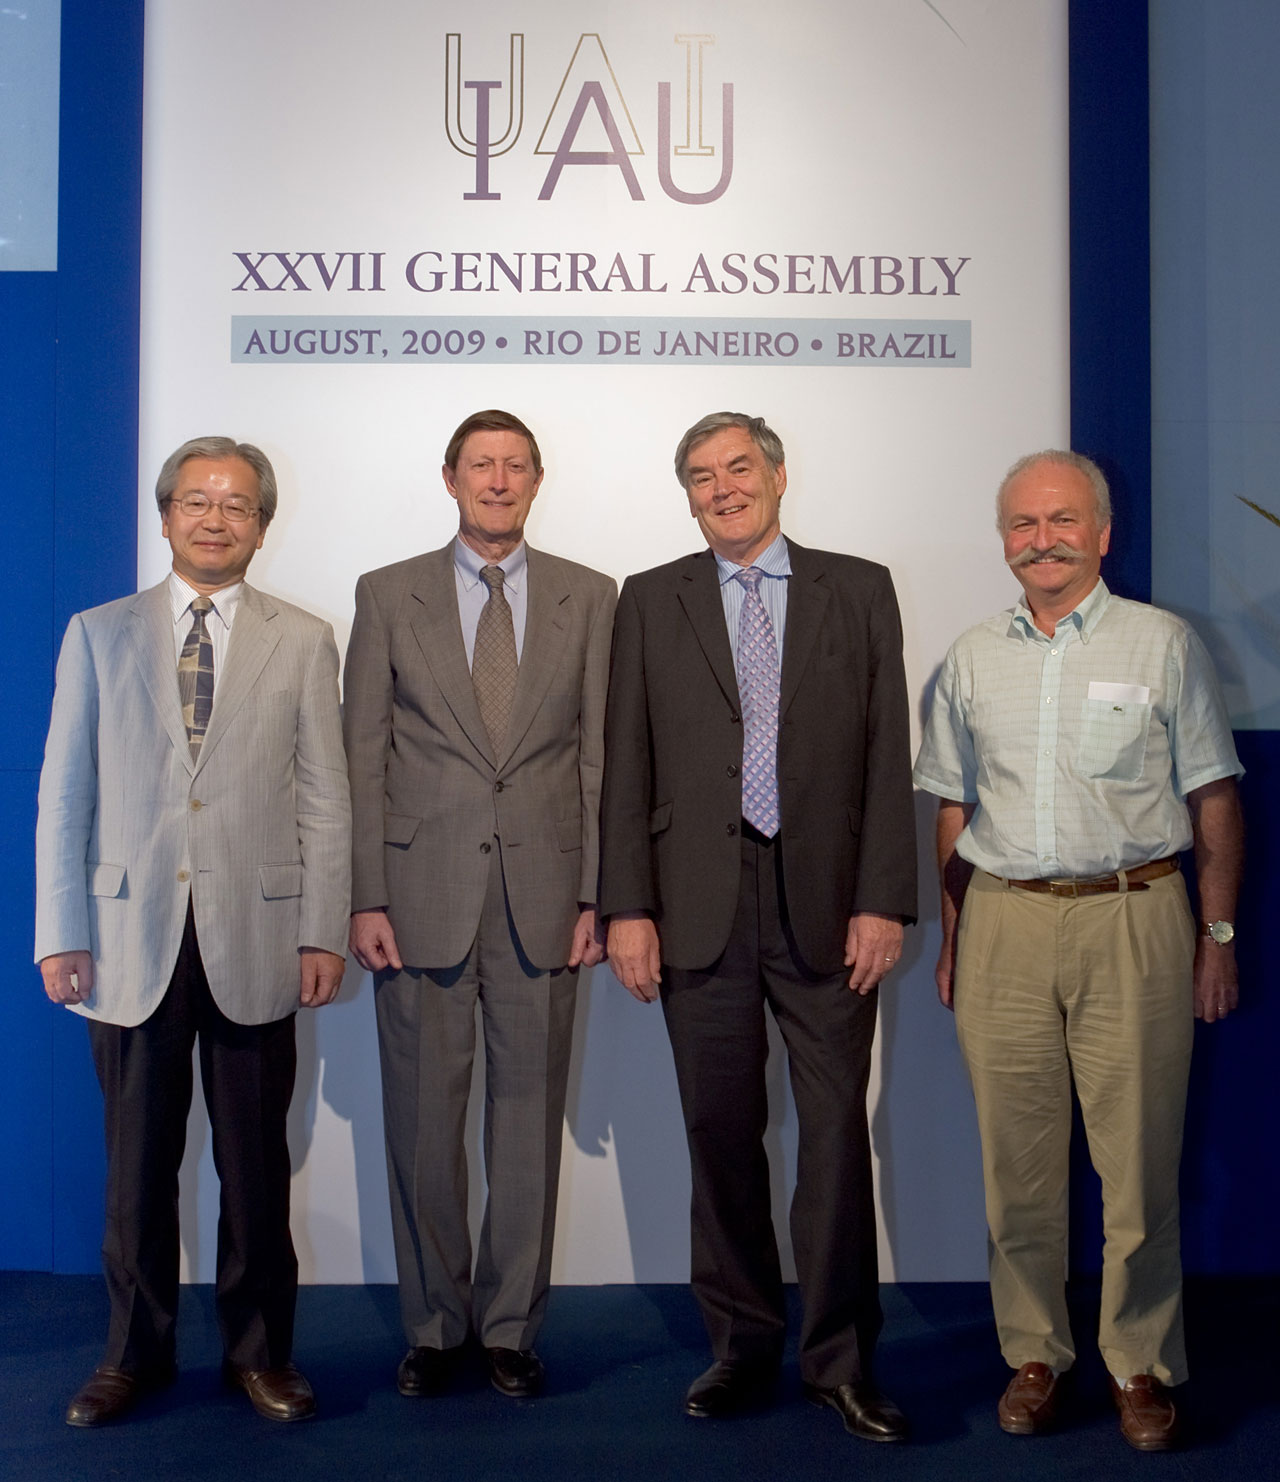 The new IAU Officers 2009